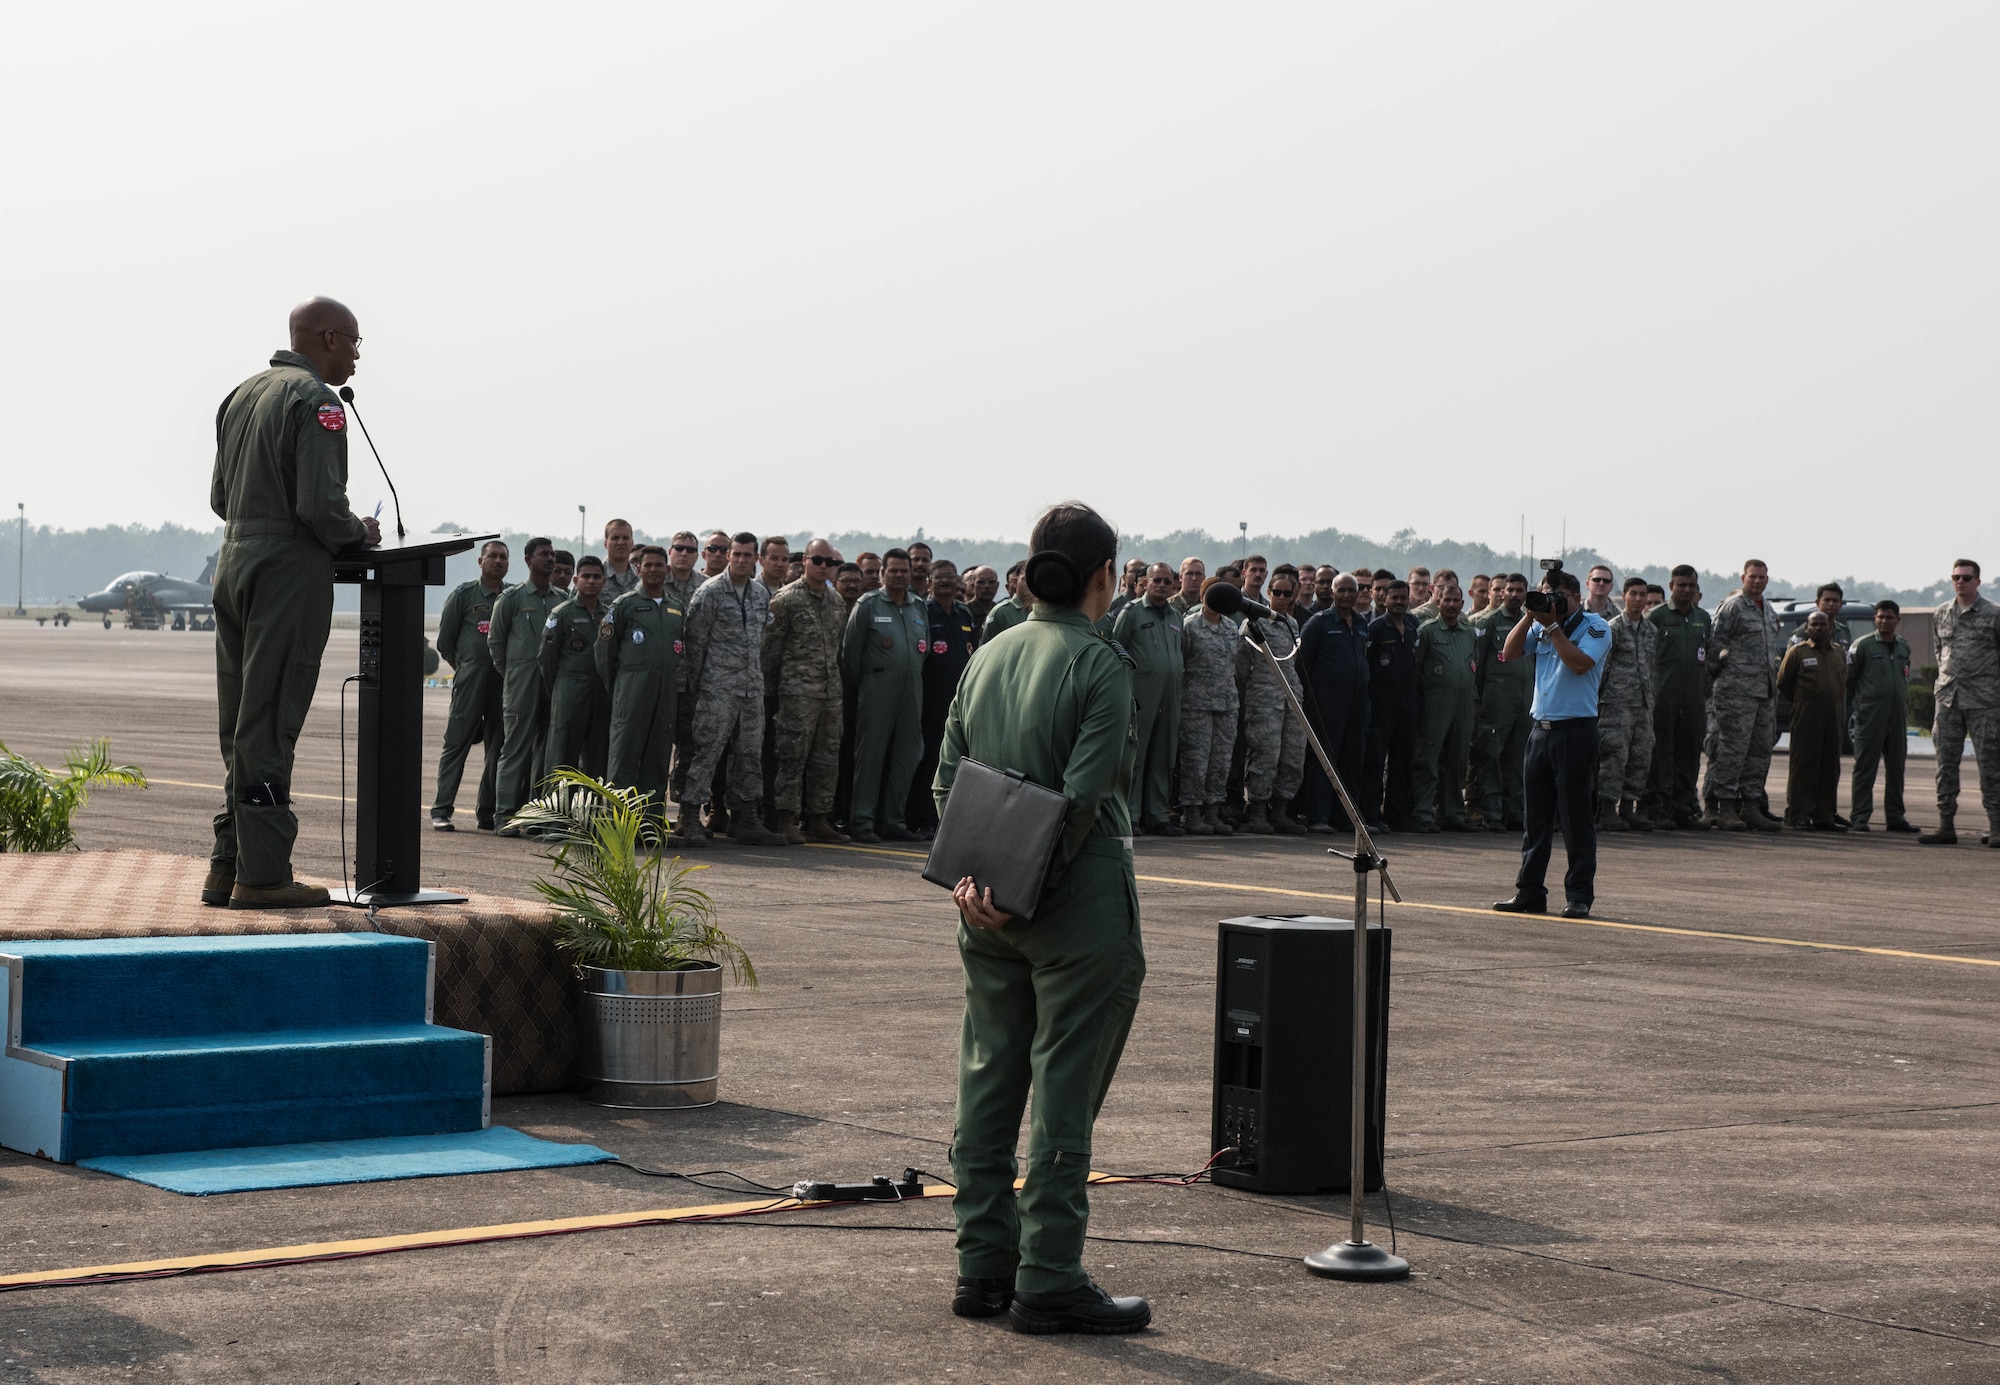 U.S. Air Force Gen. CQ Brown, Jr., Pacific Air Forces commander, gives remarks at the closing ceremony of Cope India 19 at Kalaikunda Air Force Station, India, Dec. 14, 2018.